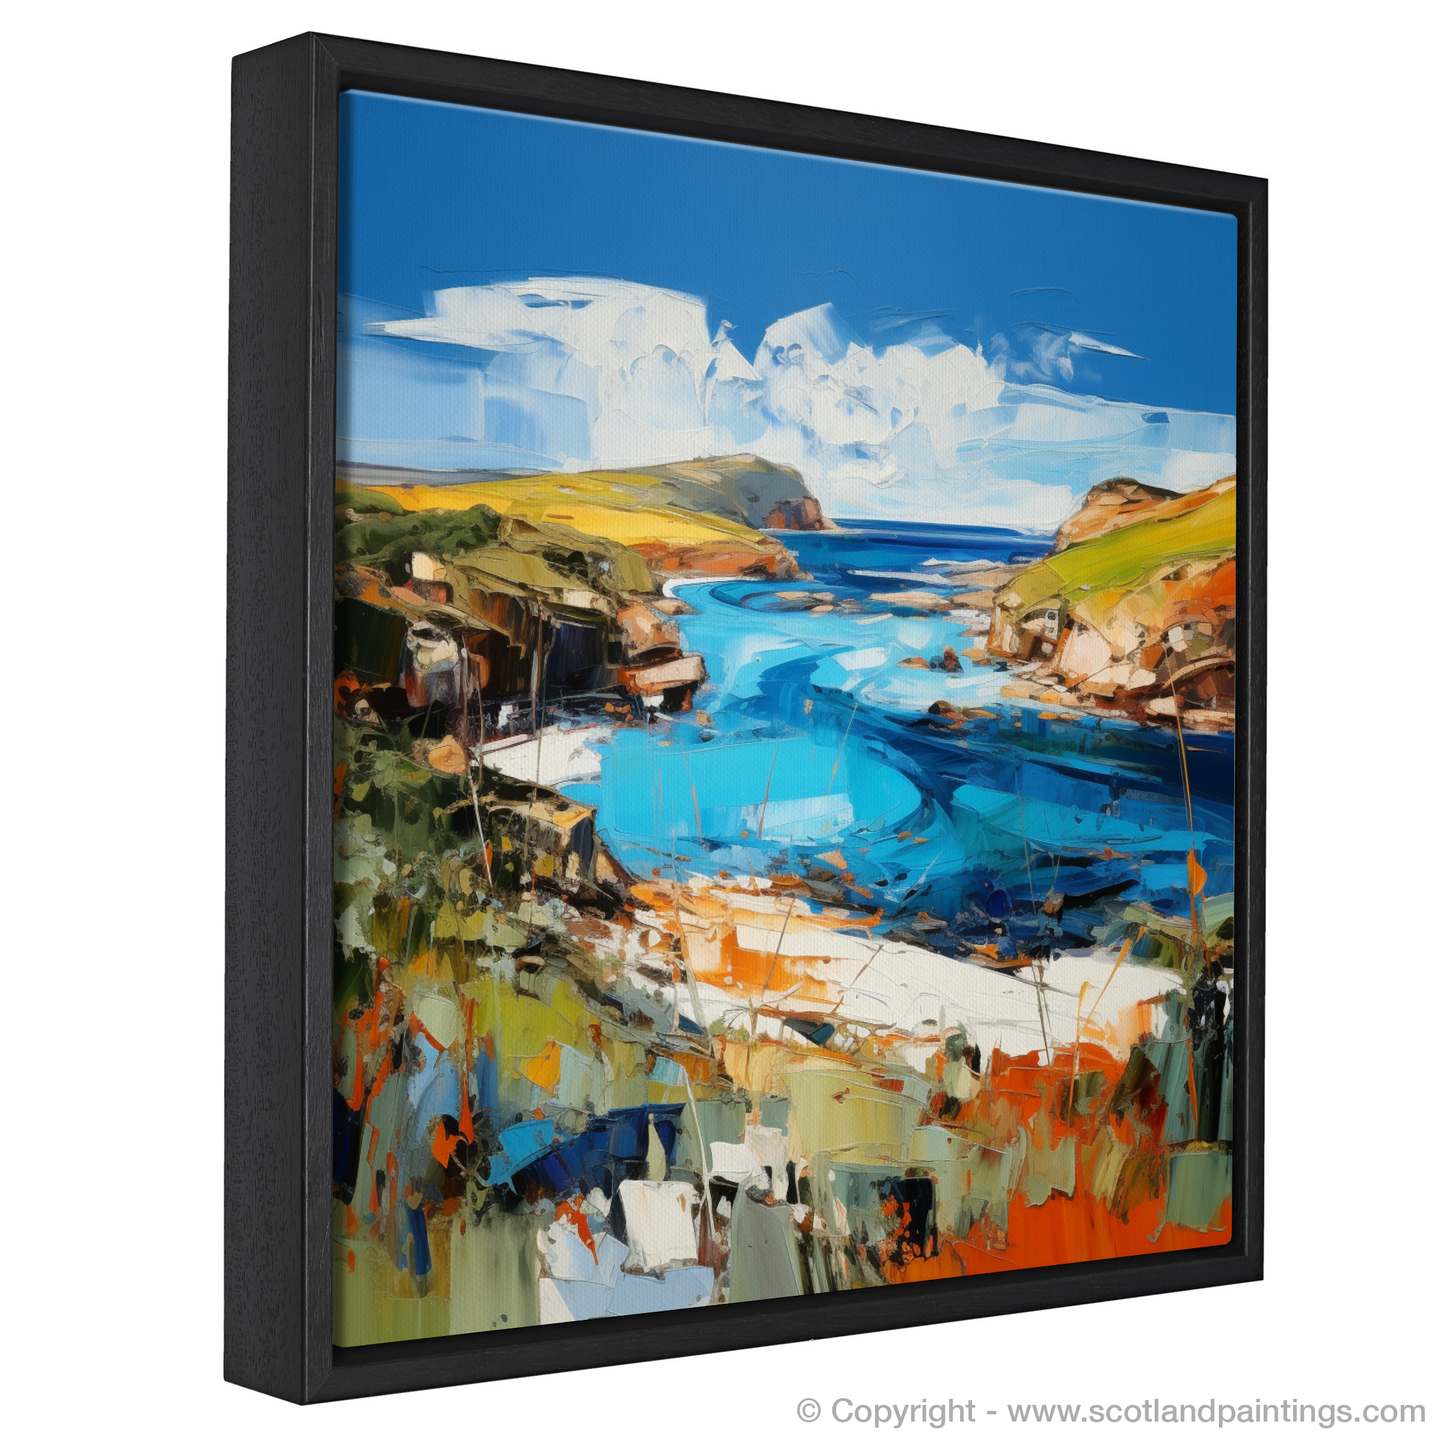 Painting and Art Print of Scourie Bay, Sutherland entitled "Capturing the Essence of Scourie Bay: An Expressionist Homage to Scottish Coves".